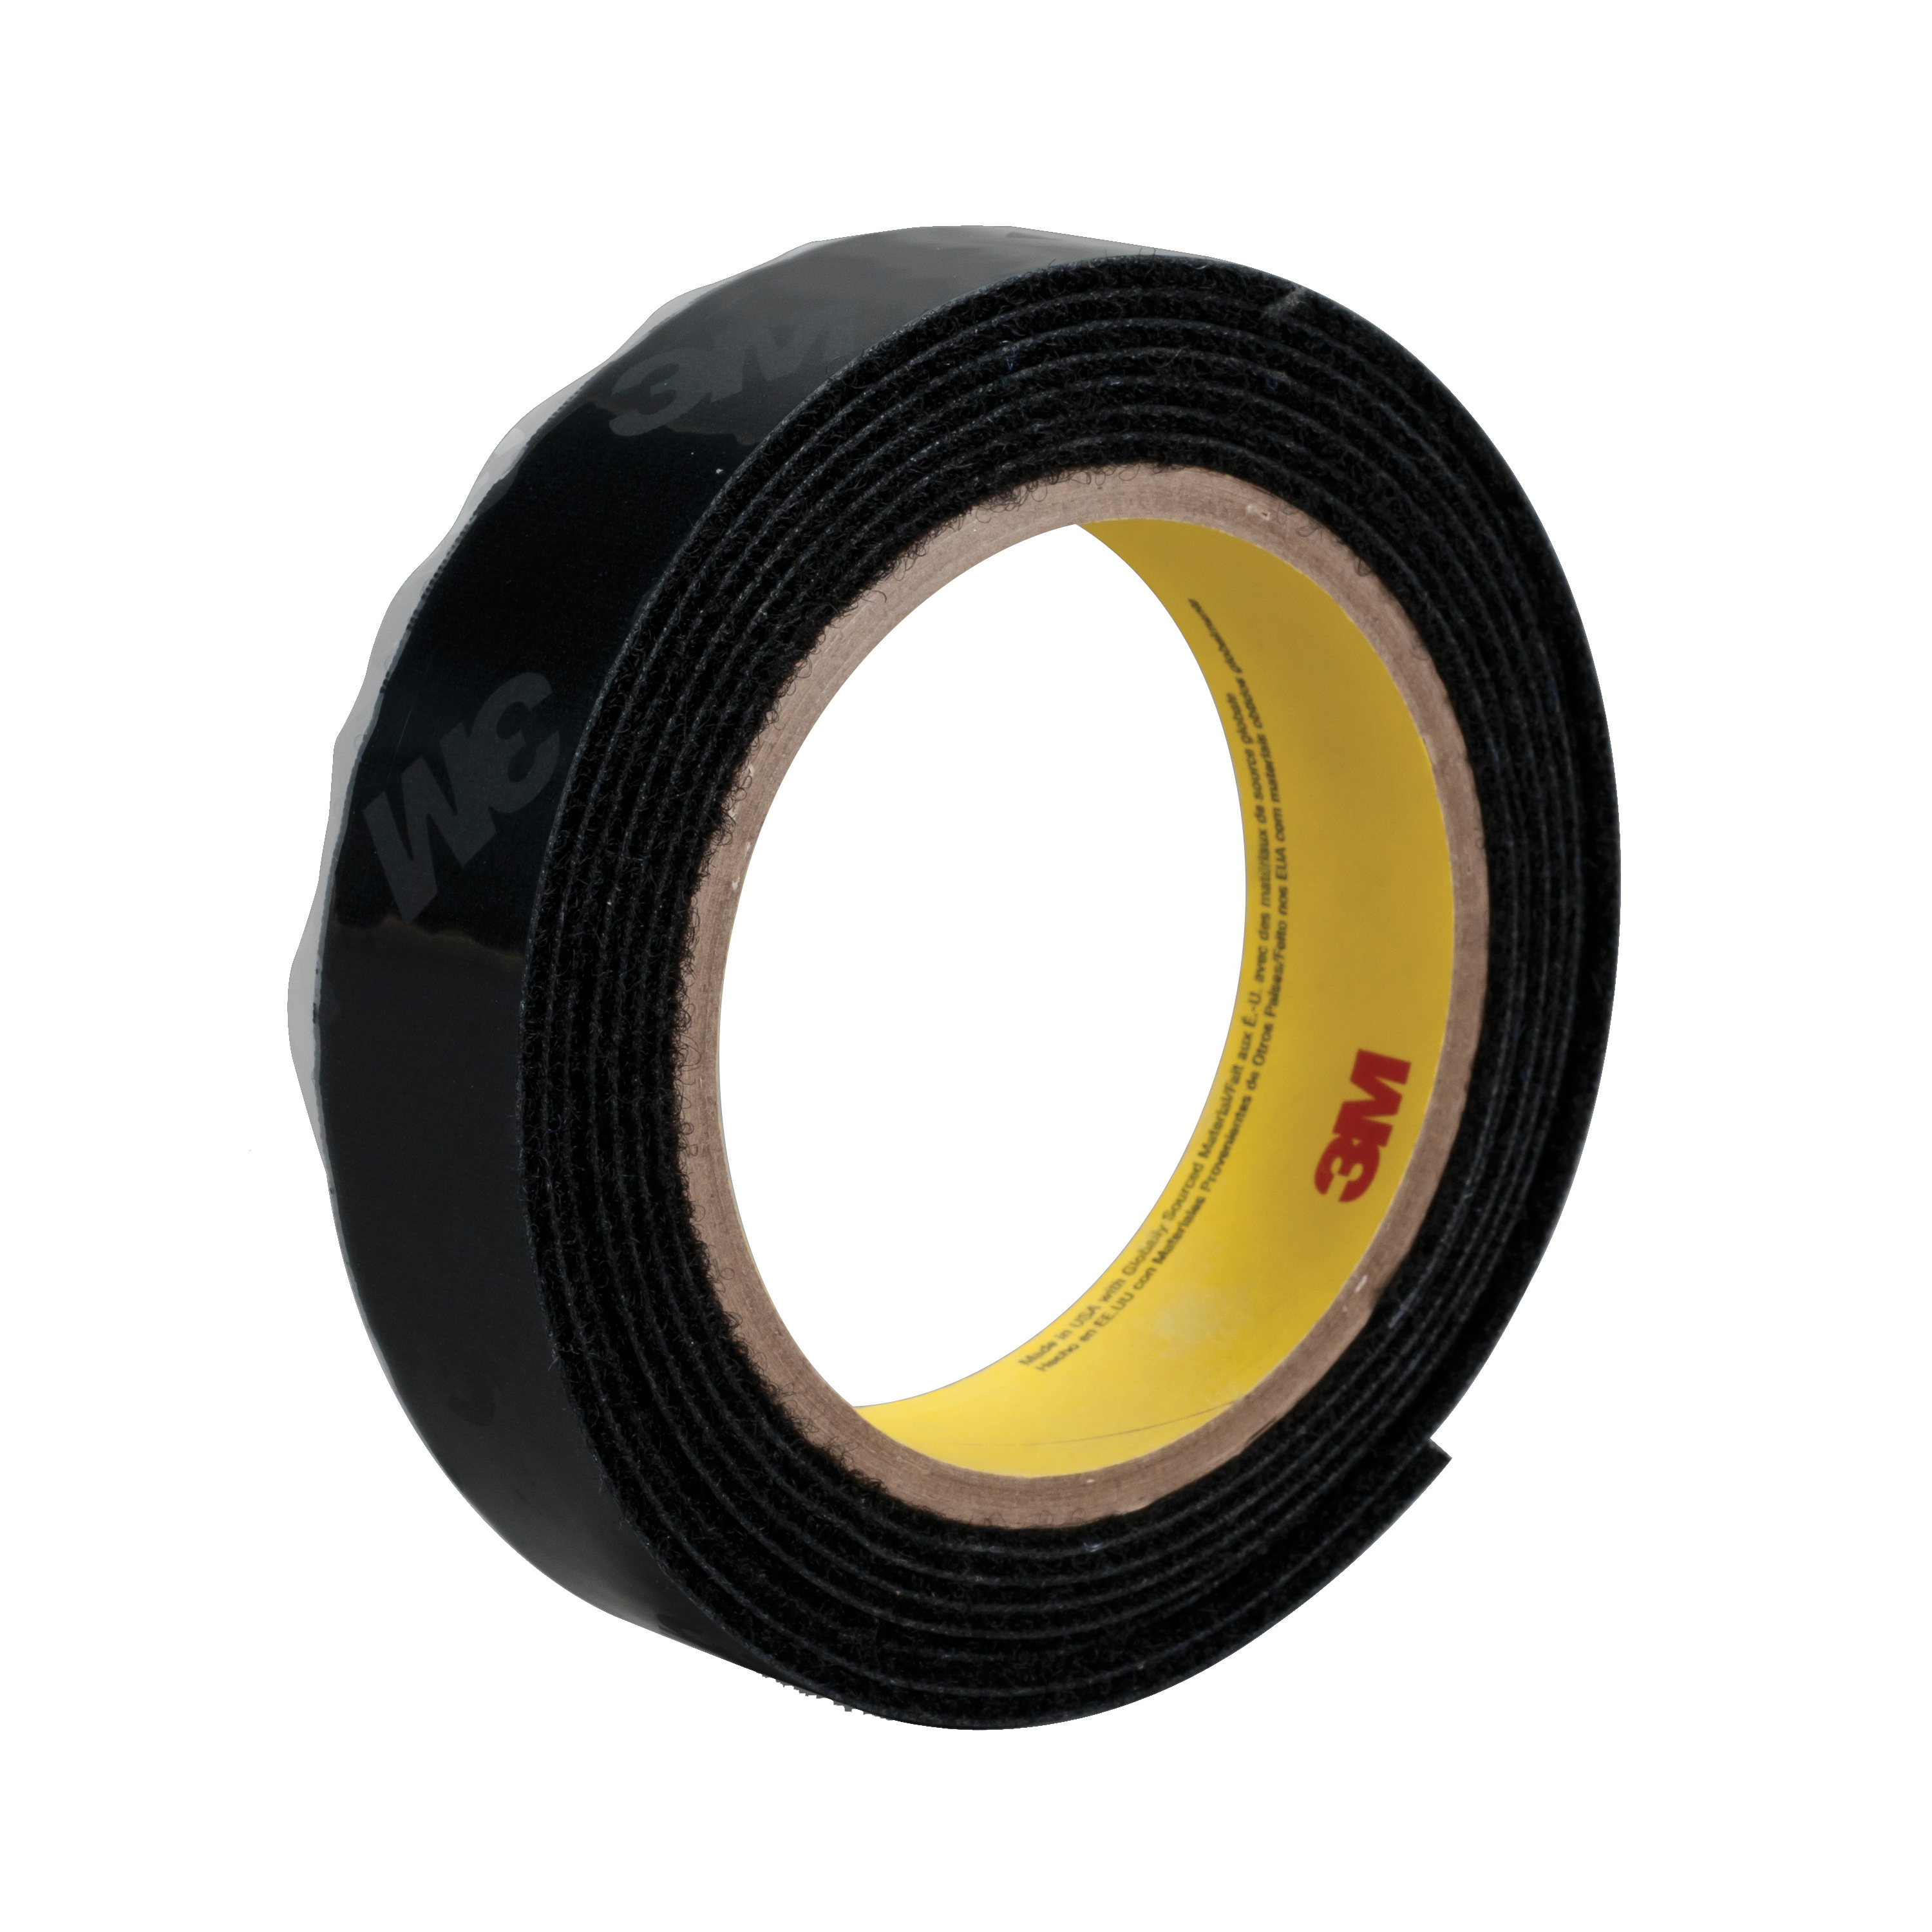 3M™ 021200-38059 Reclosable Loop Fastener Tape, 25 yd L x 1 in W, 0.15 in THK Engaged, High Performance Acrylic PSA Adhesive, Woven Nylon Backing, Black